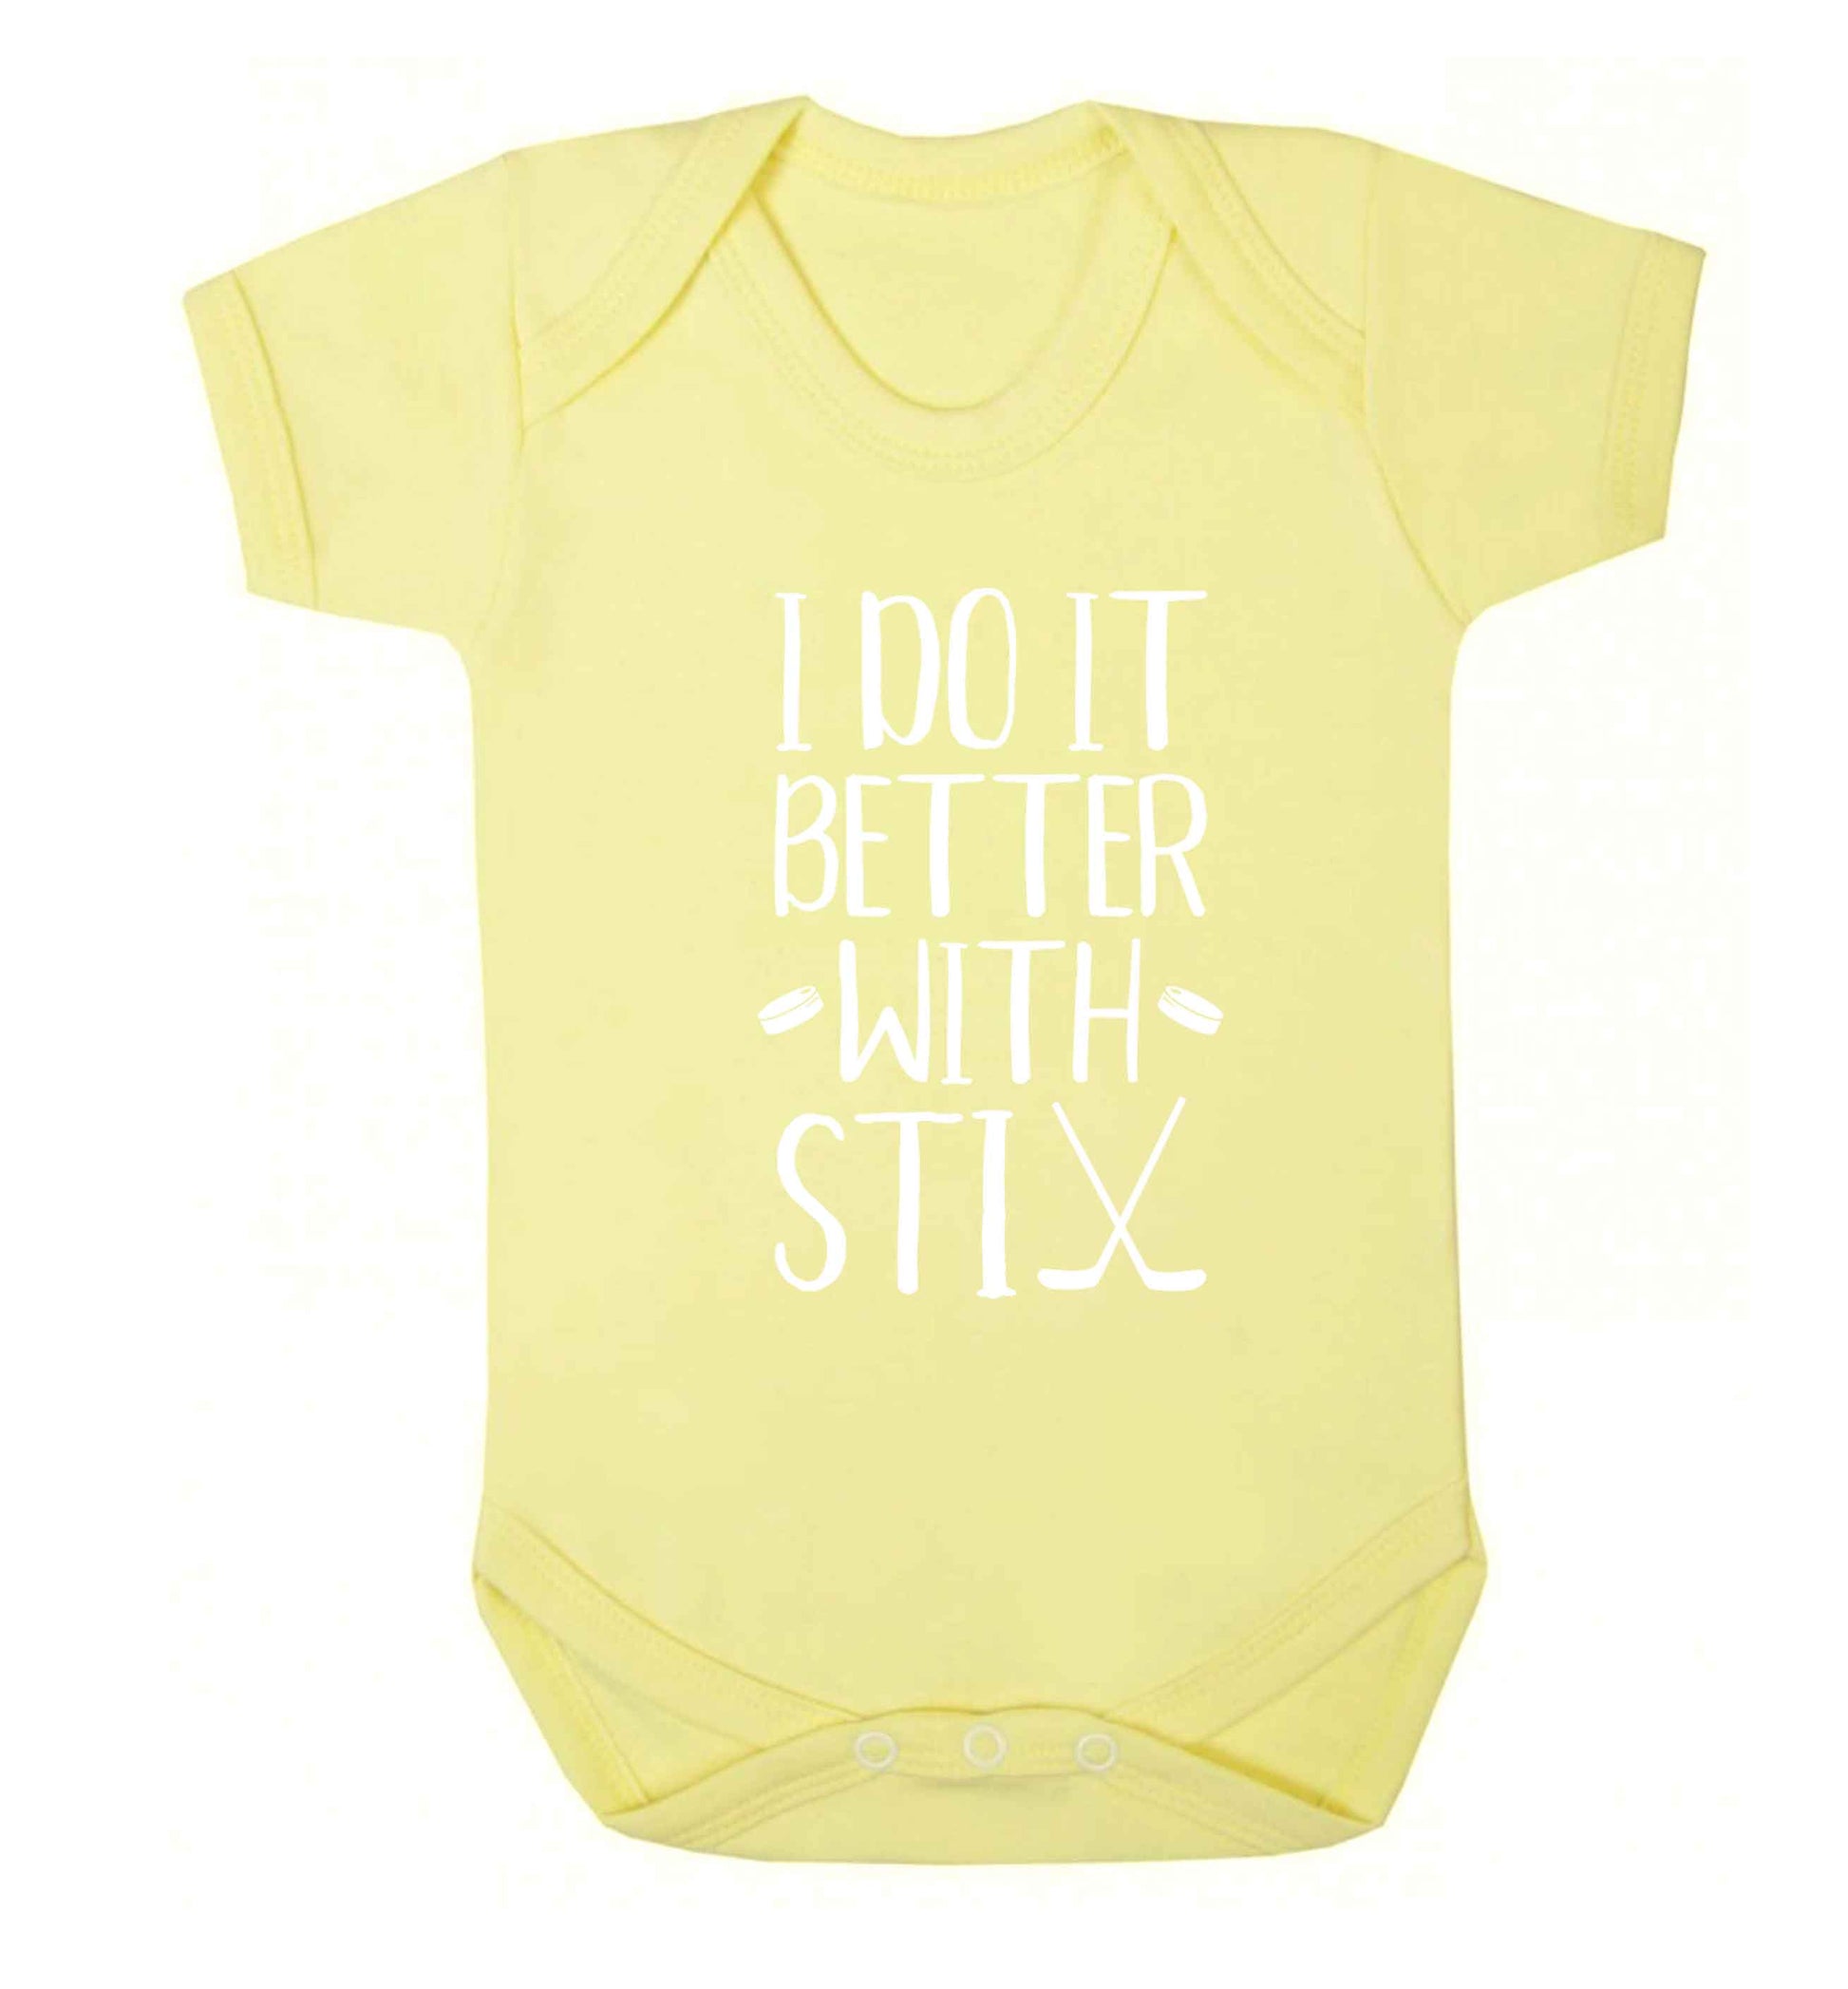 I do it better with stix (hockey) Baby Vest pale yellow 18-24 months